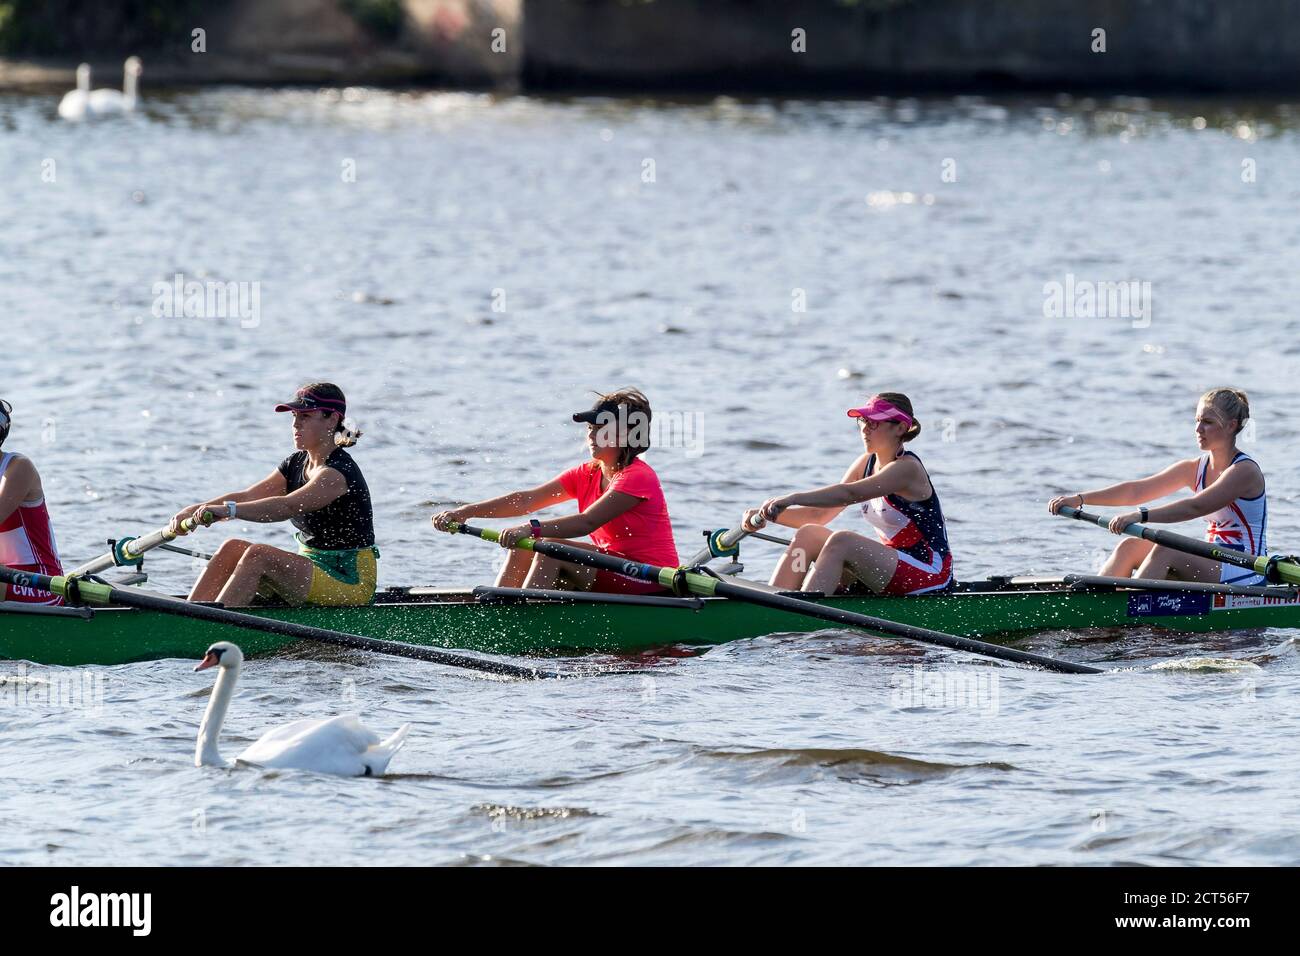 four members of the Eights rowboat rowing and parting the swan Stock Photo